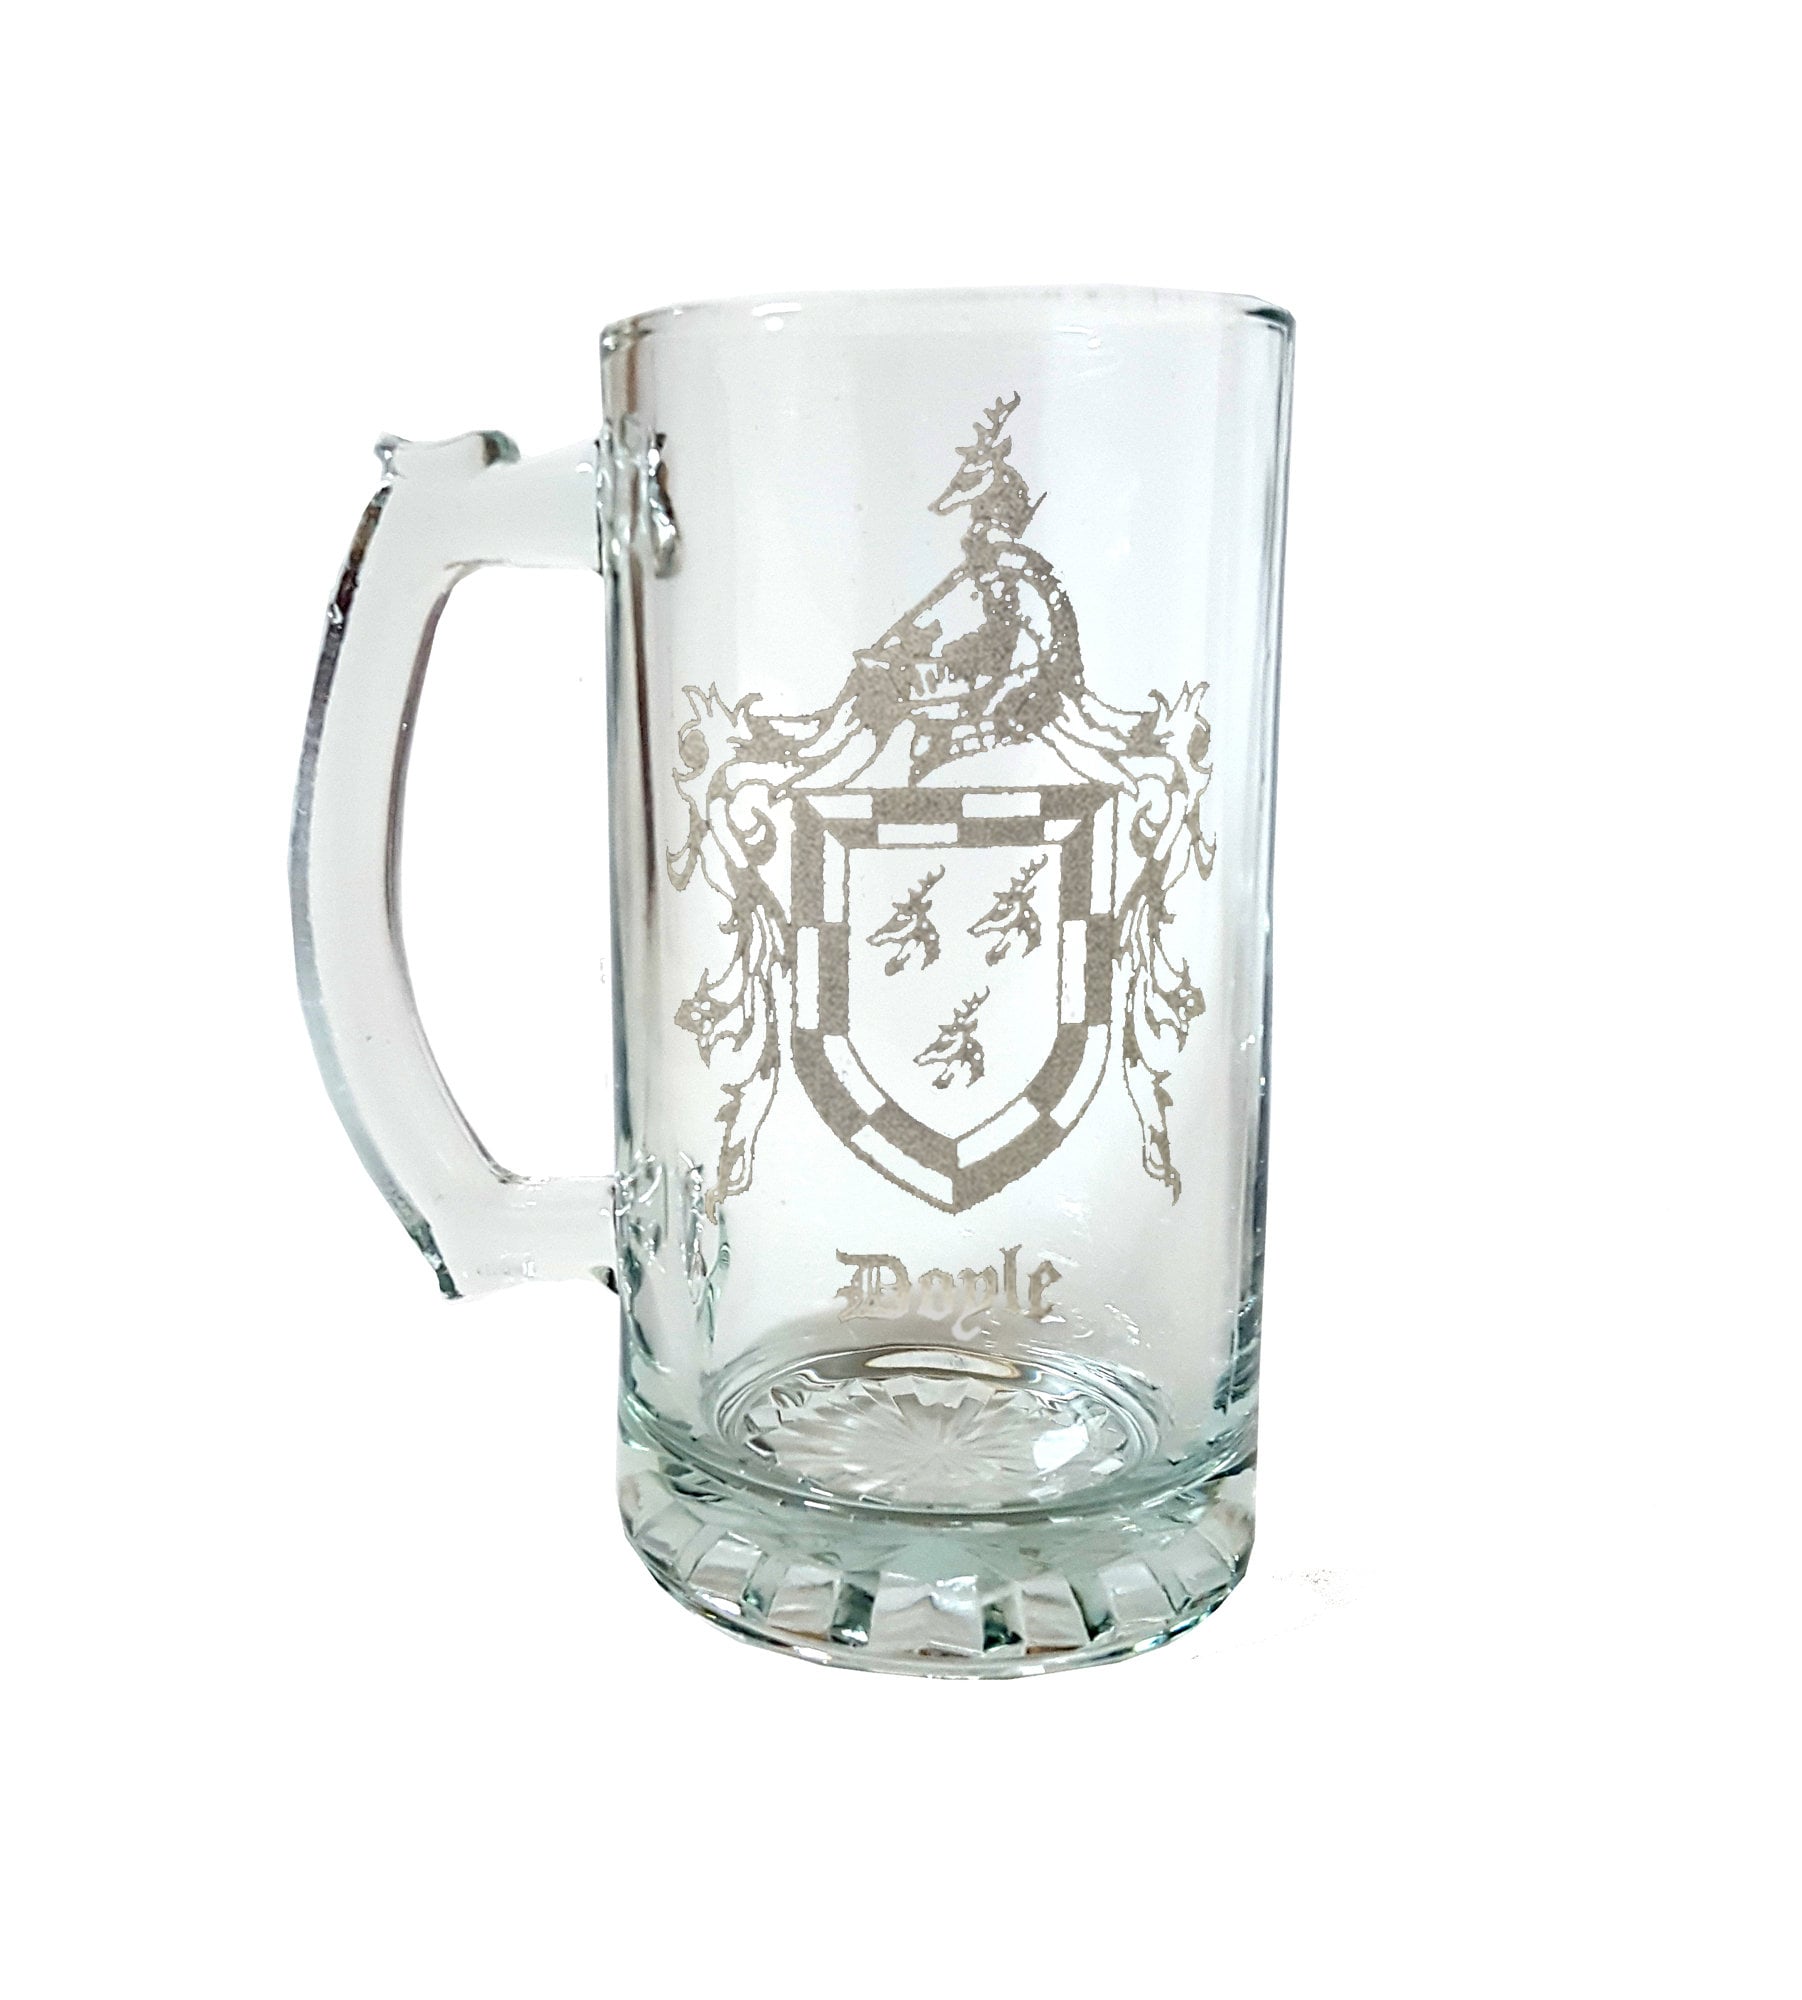 Free Personalized Engraving Celtic Wolf 27oz Stein